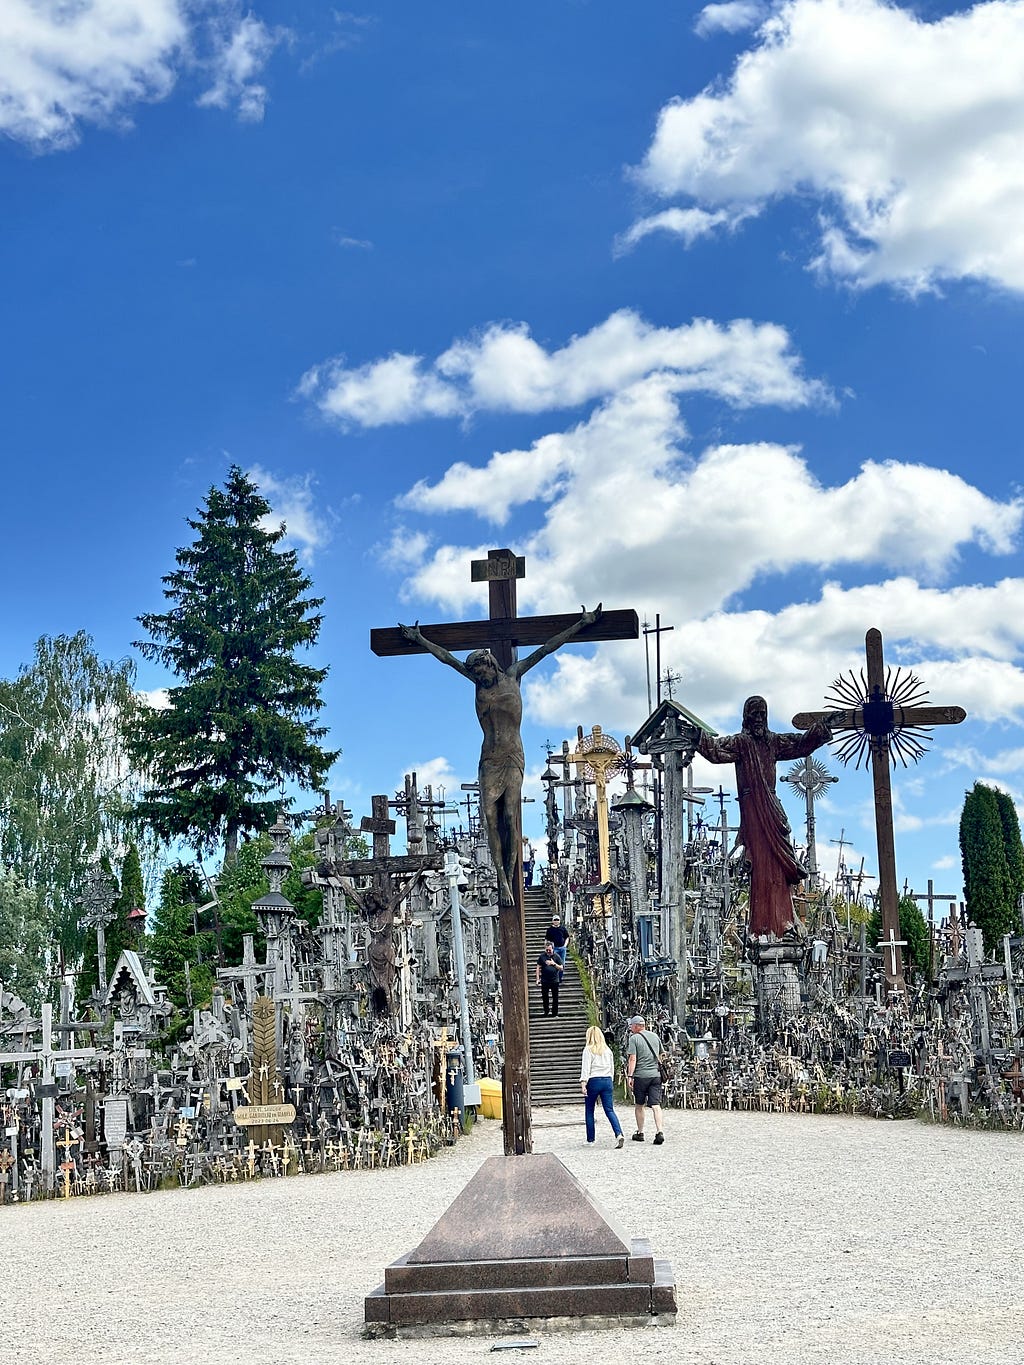 The first look, Hill of Crosses